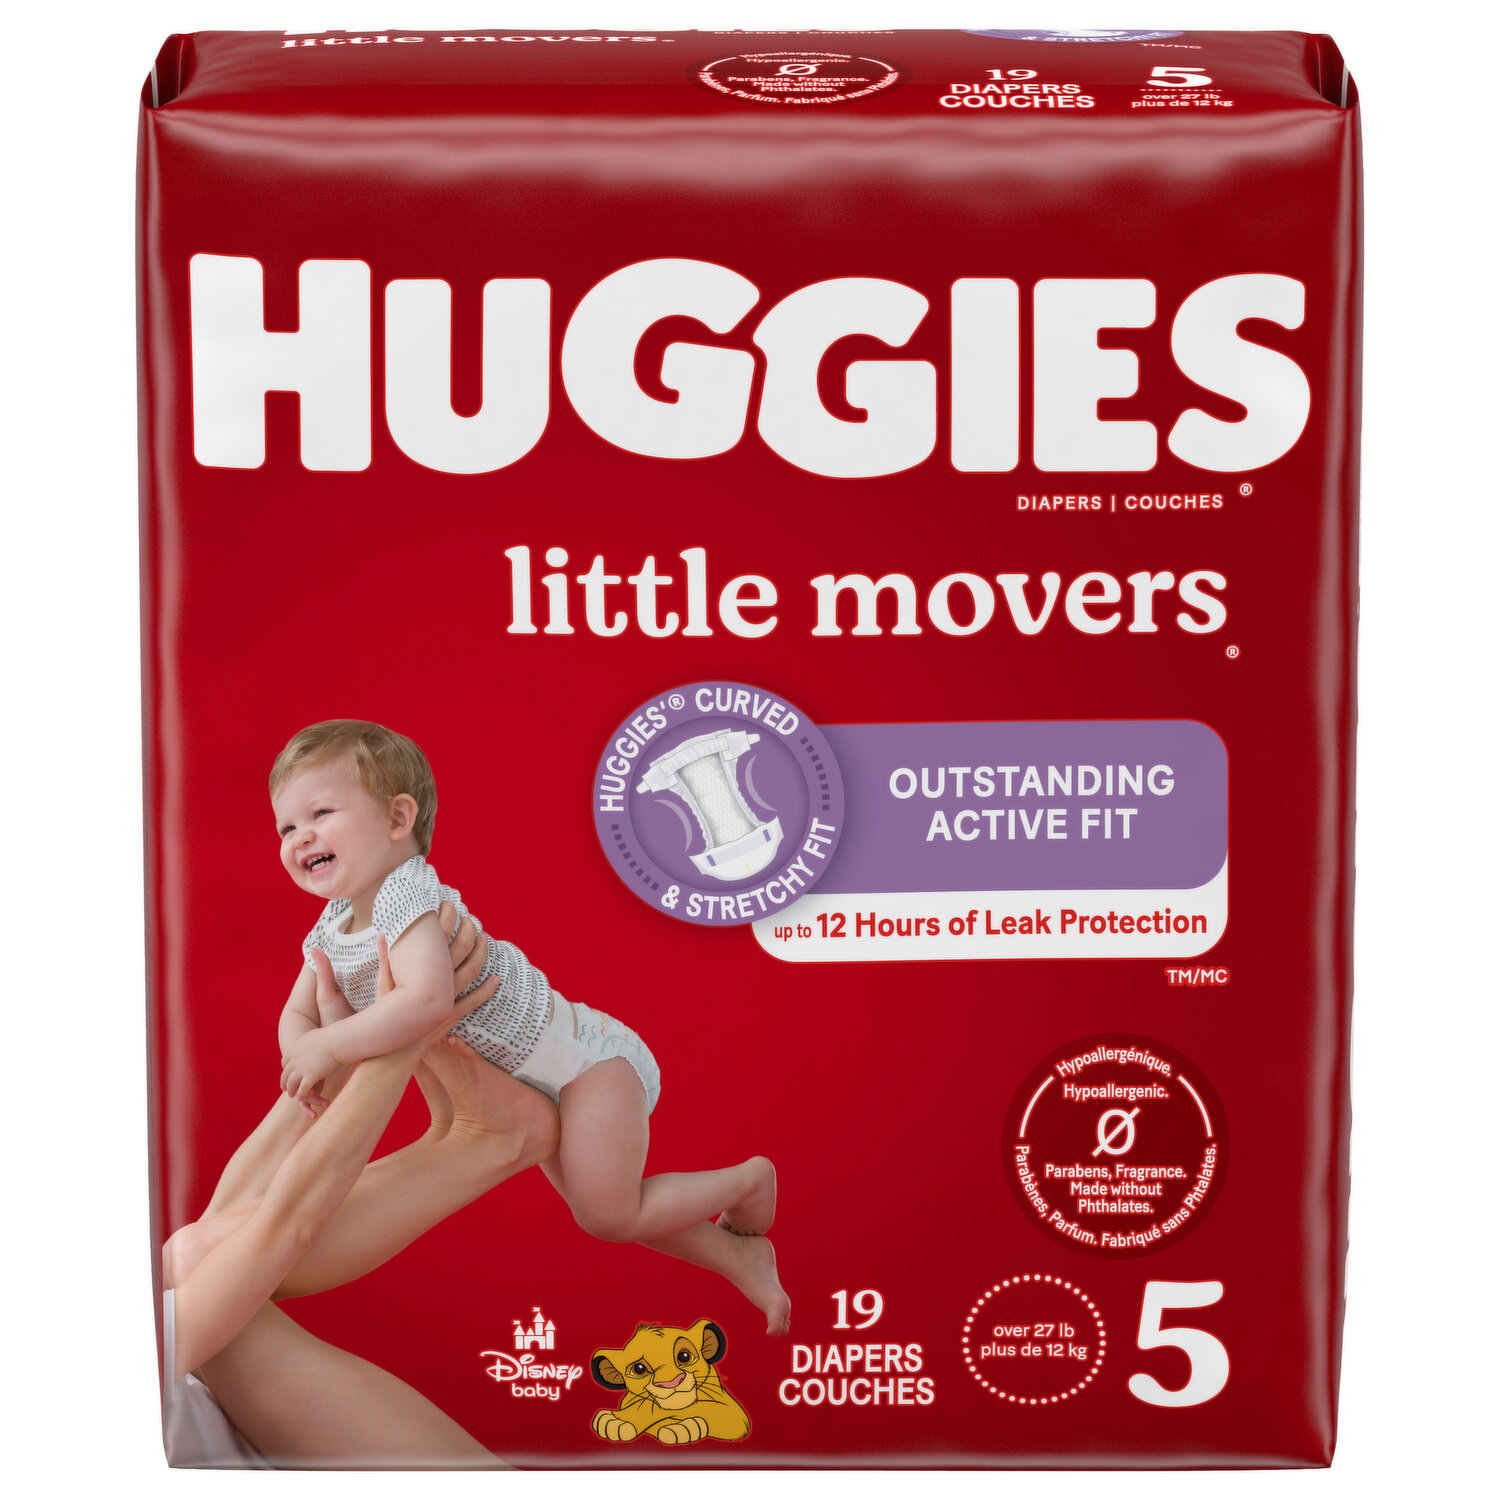 Luvs with Ultra Leakguards Jumbo Pack Size 6 Diapers 23 Count, Diapers &  Training Pants